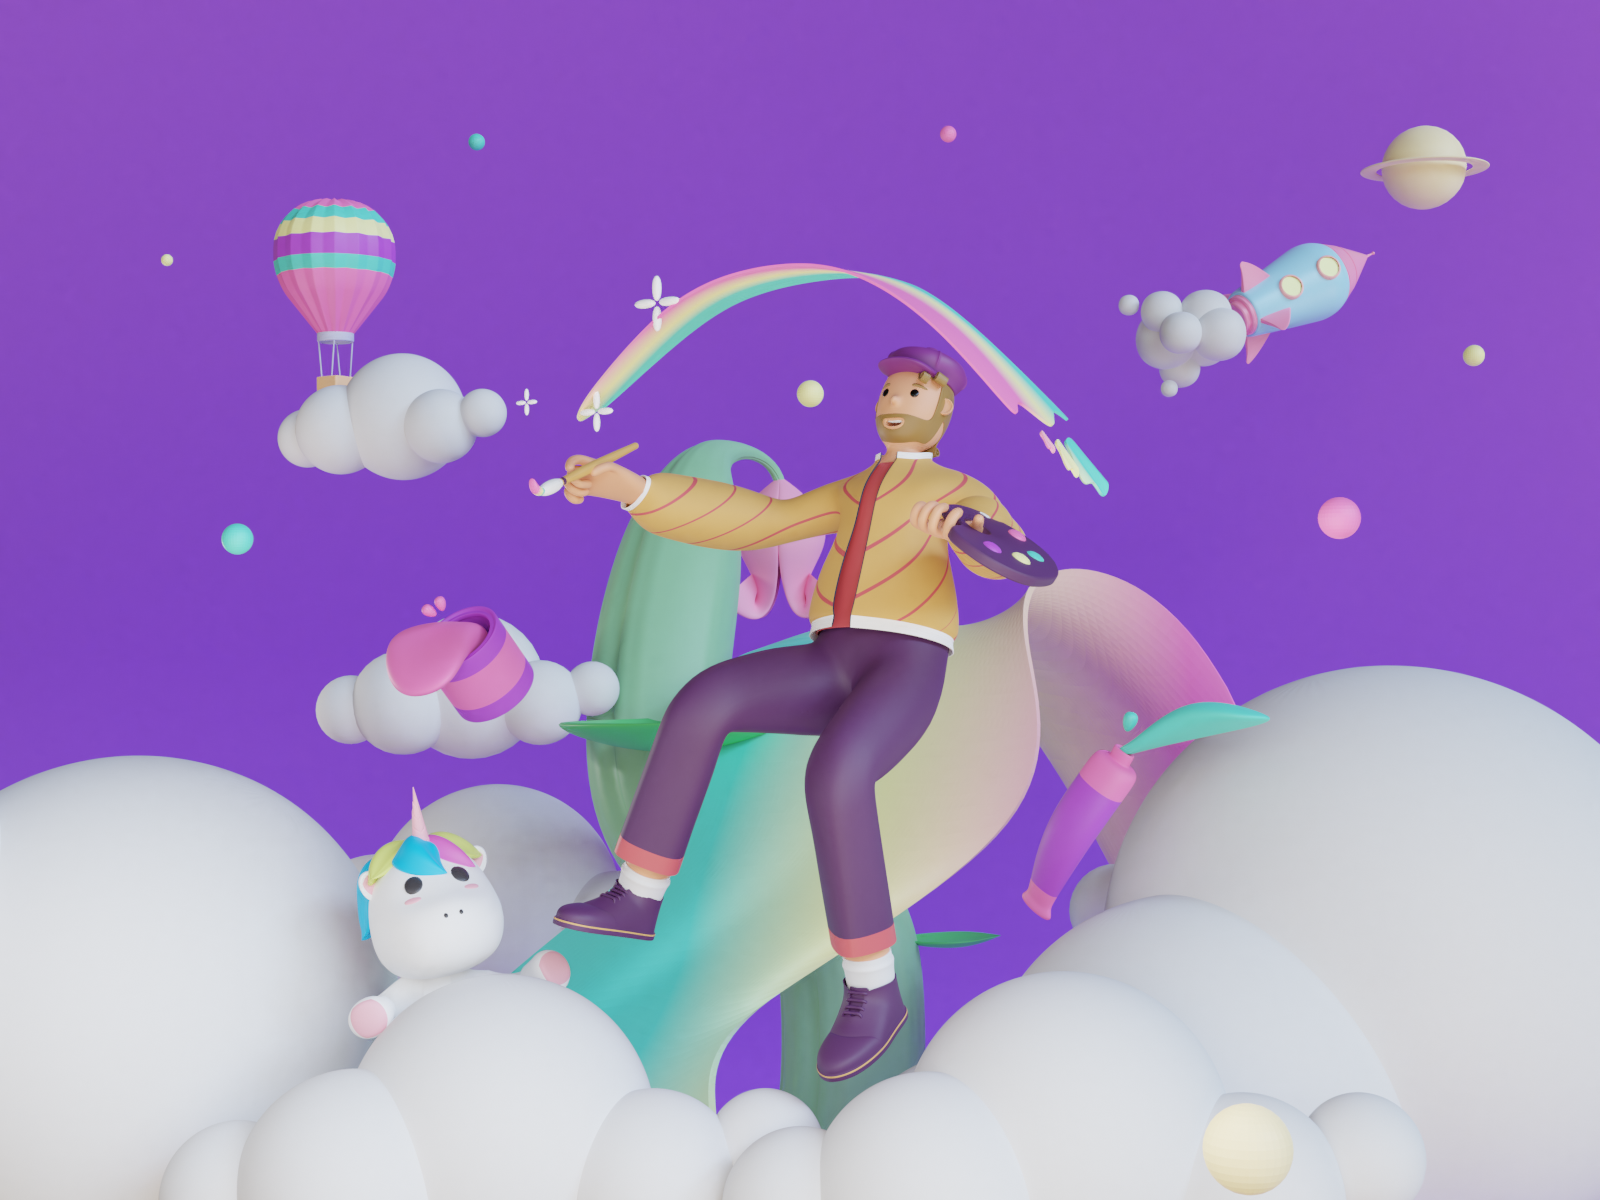 Painting the sky by RURI PELINANDANG on Dribbble